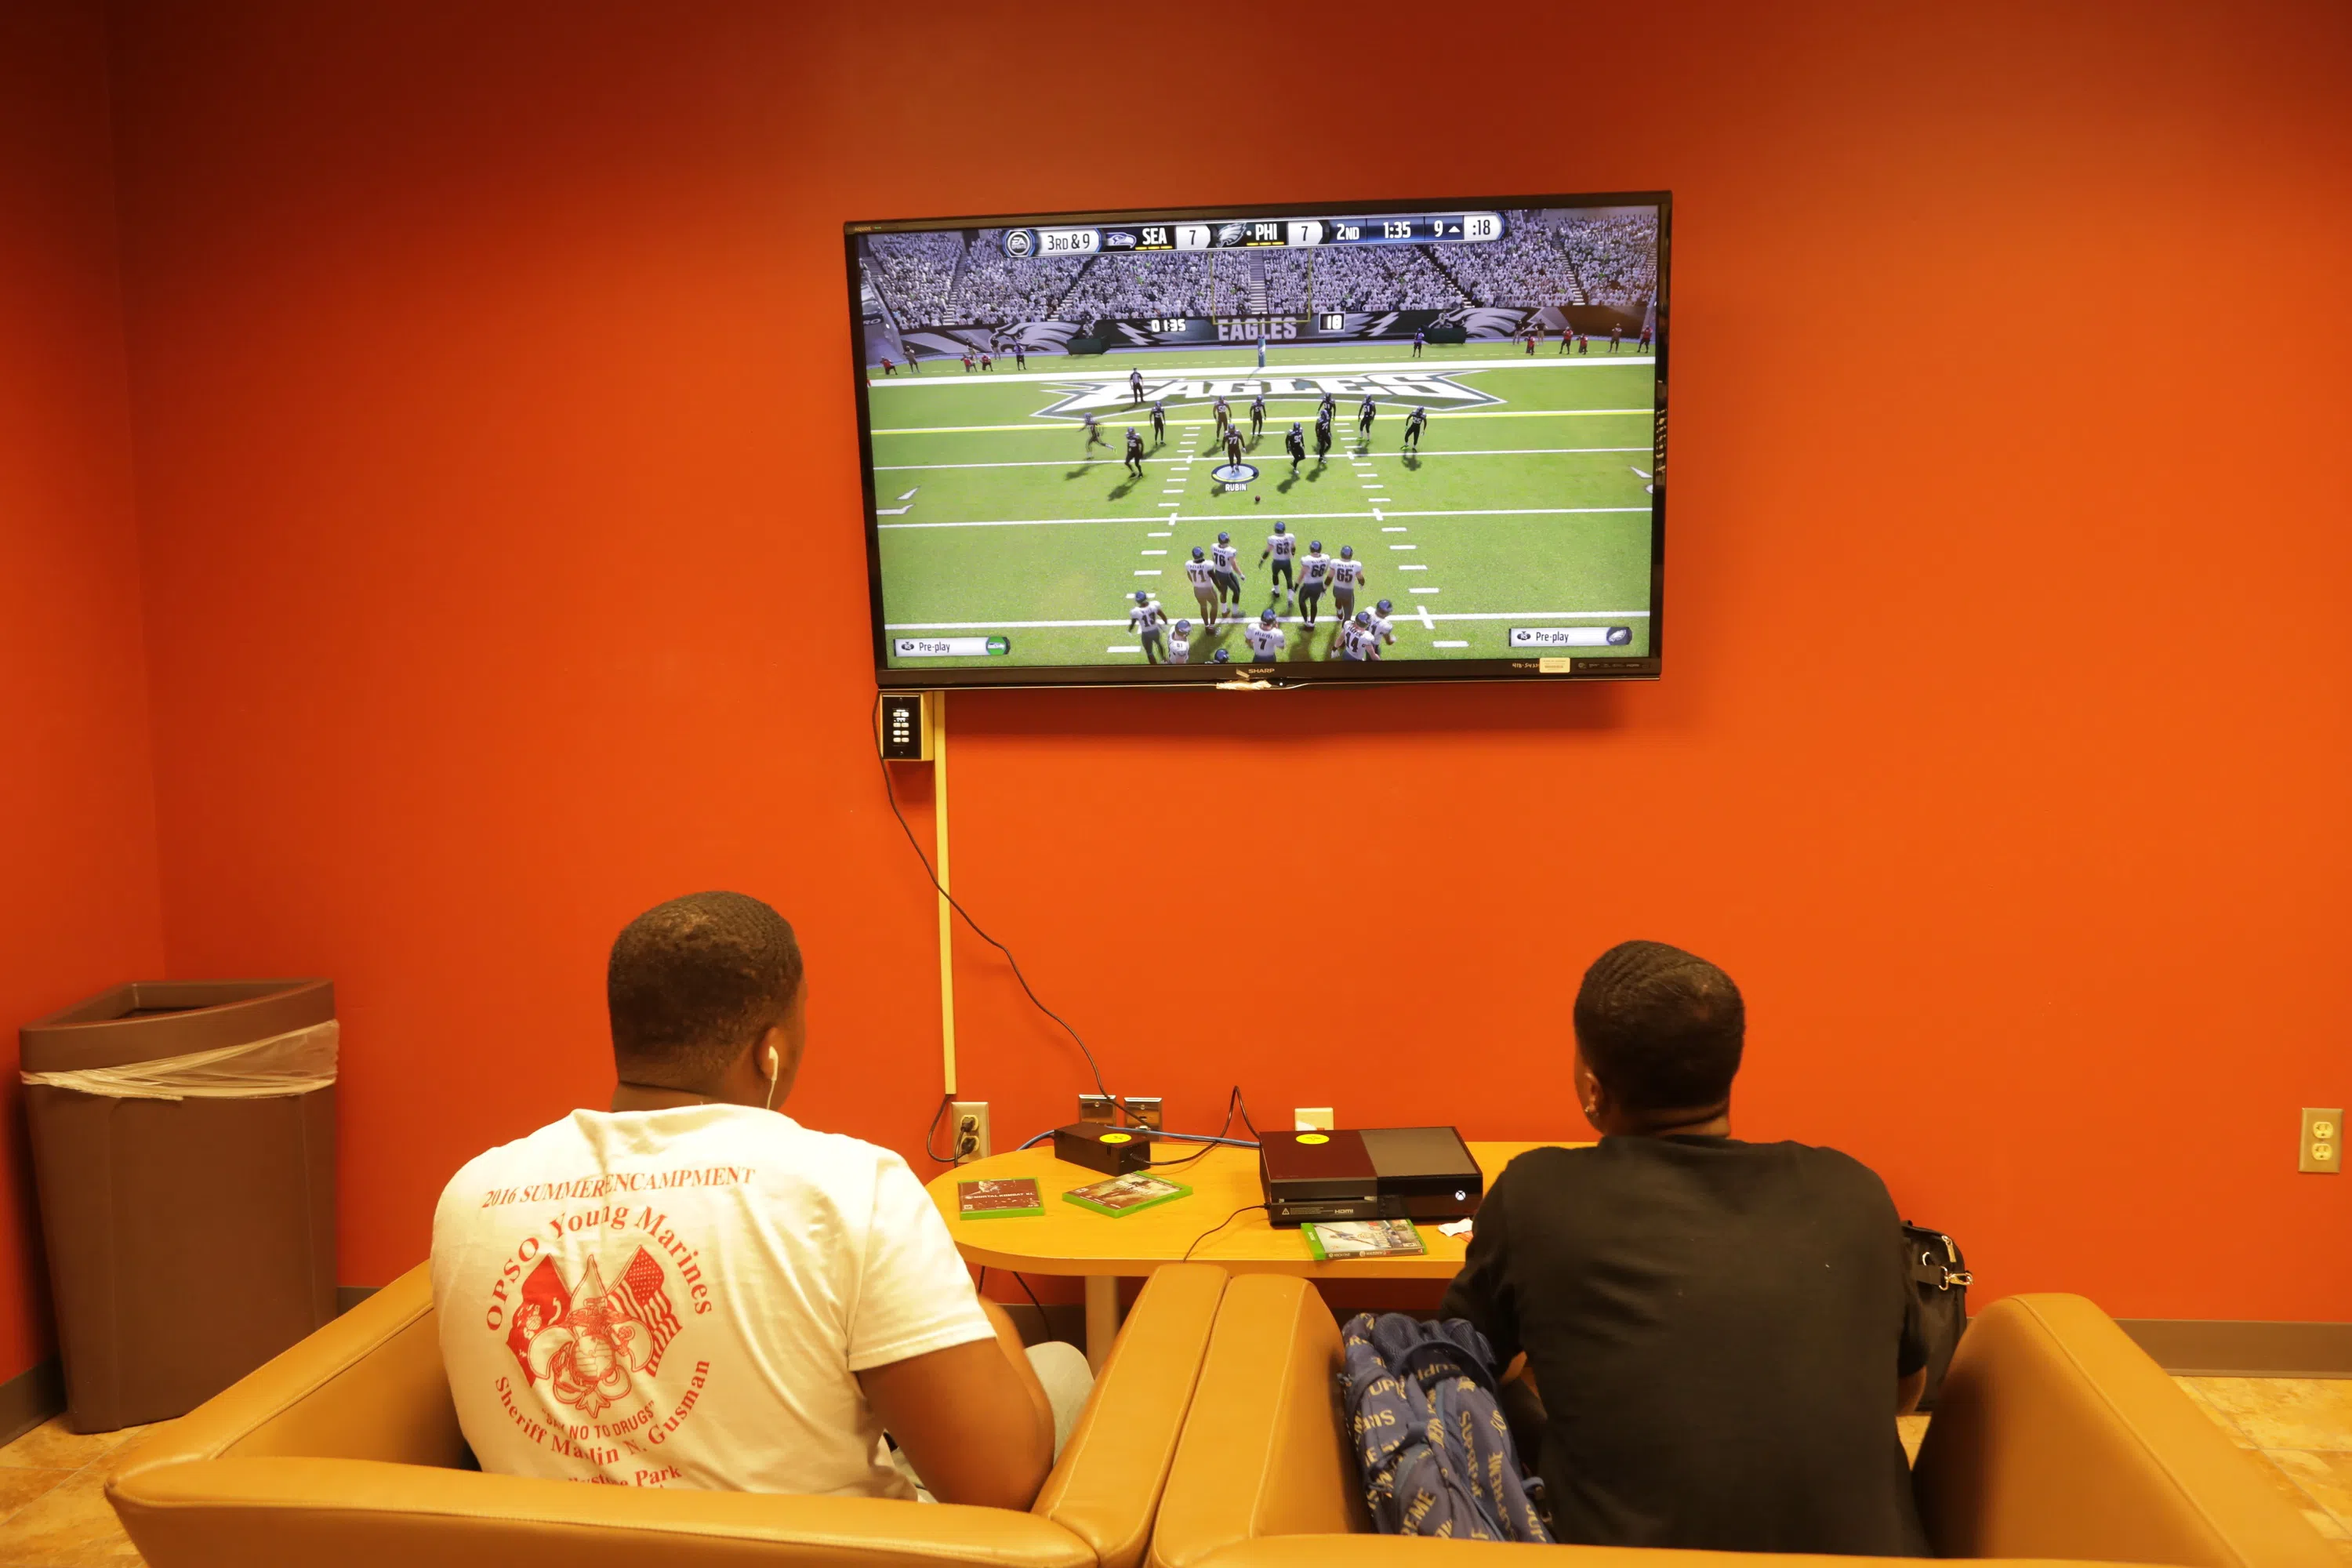 2 people facing a large tv mounted to a wall playing video games